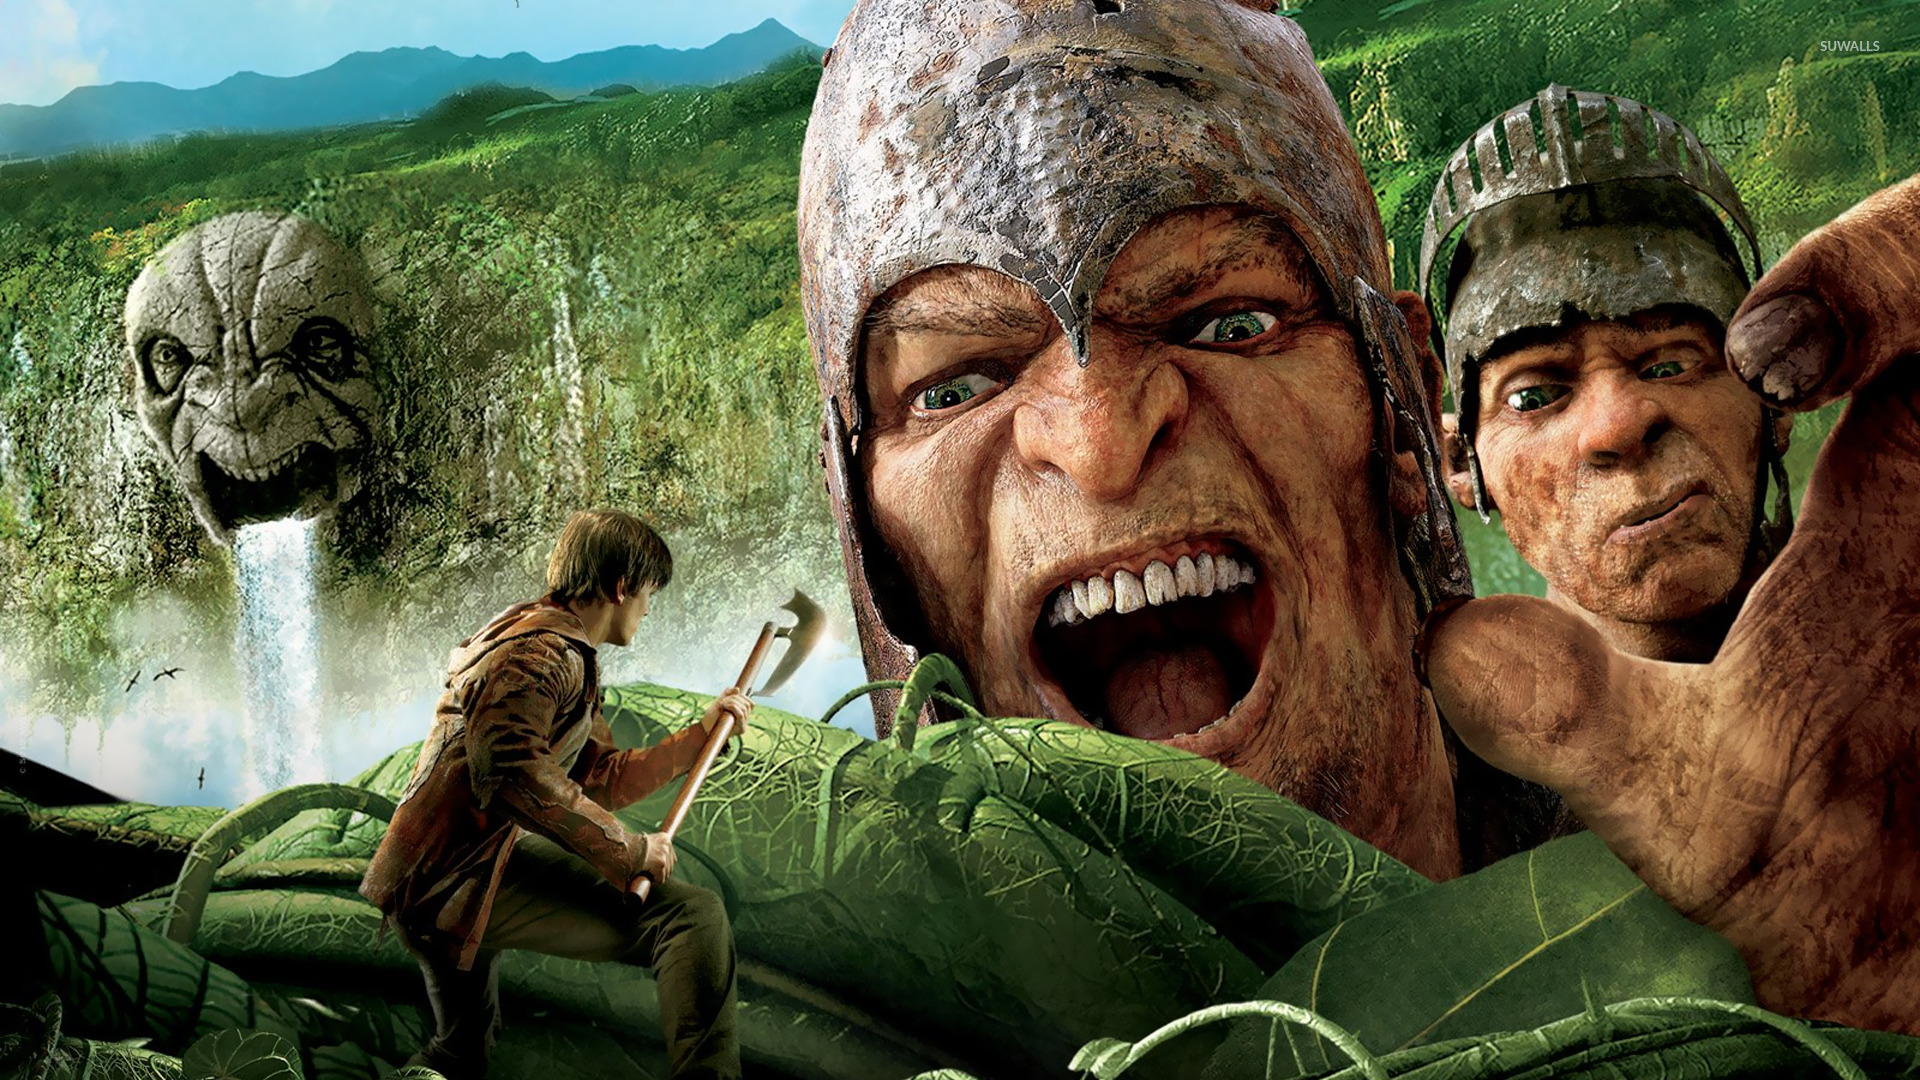 HQ Jack The Giant Slayer Wallpapers | File 820.72Kb